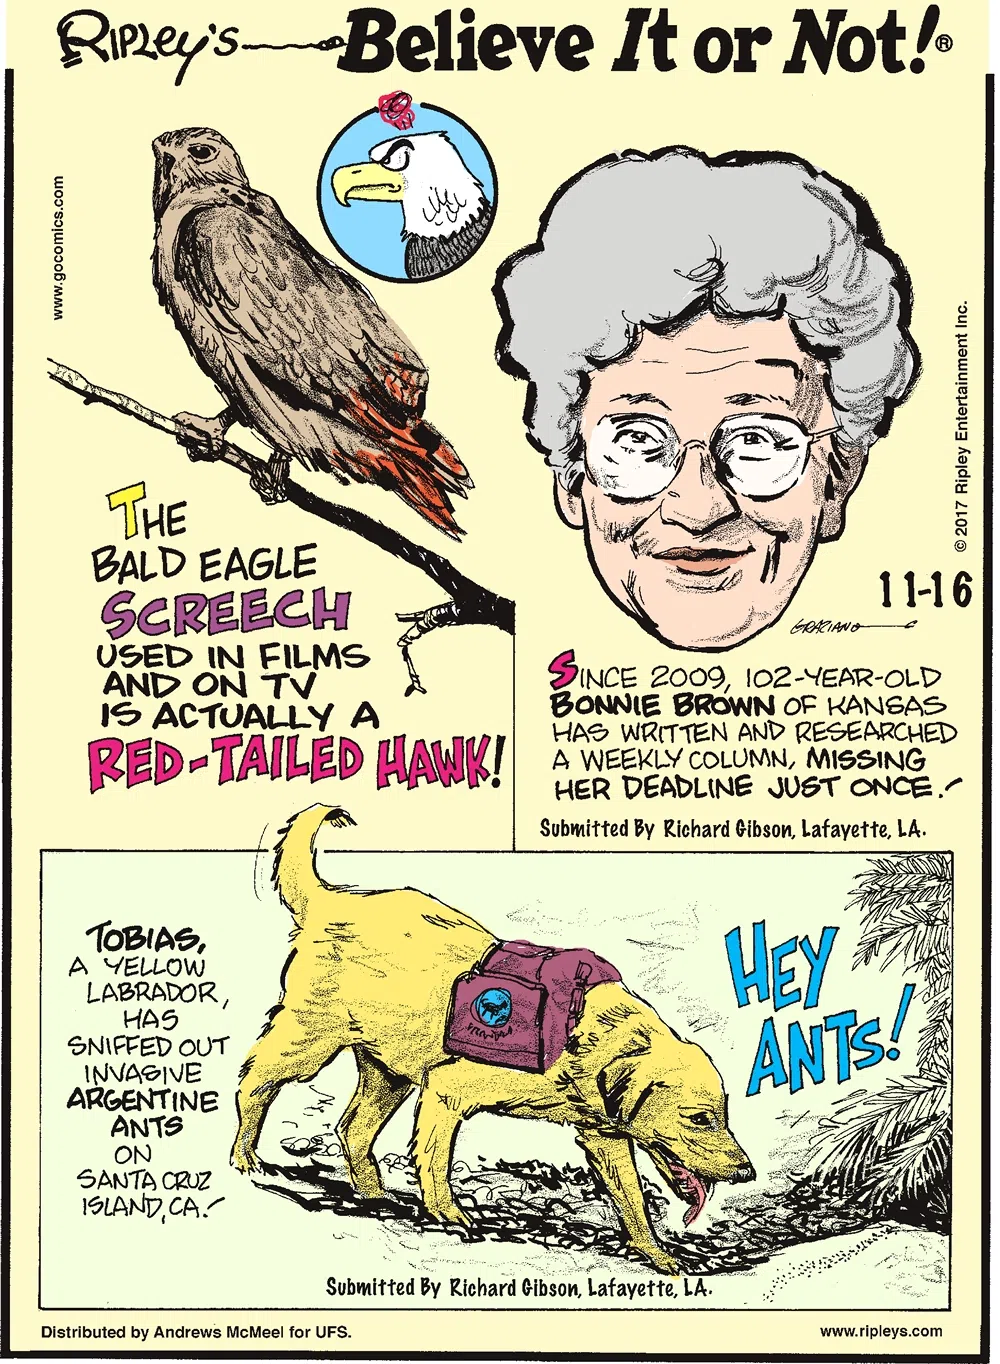 The bald eagle screech used in films and on TV is actually a red-tailed hawk!-------------------- Since 2009, 102-year-old Bonnie Brown of Kansas has written and researched a weekly column, missing her deadline just once! Submitted by Richard Gibson, Lafayette, LA.-------------------- Tobias, a yellow labrador, has sniffed out invasive Argentine ants on Santa Cruz Island, CA! Submitted by Richard Gibson, Lafayette, LA.